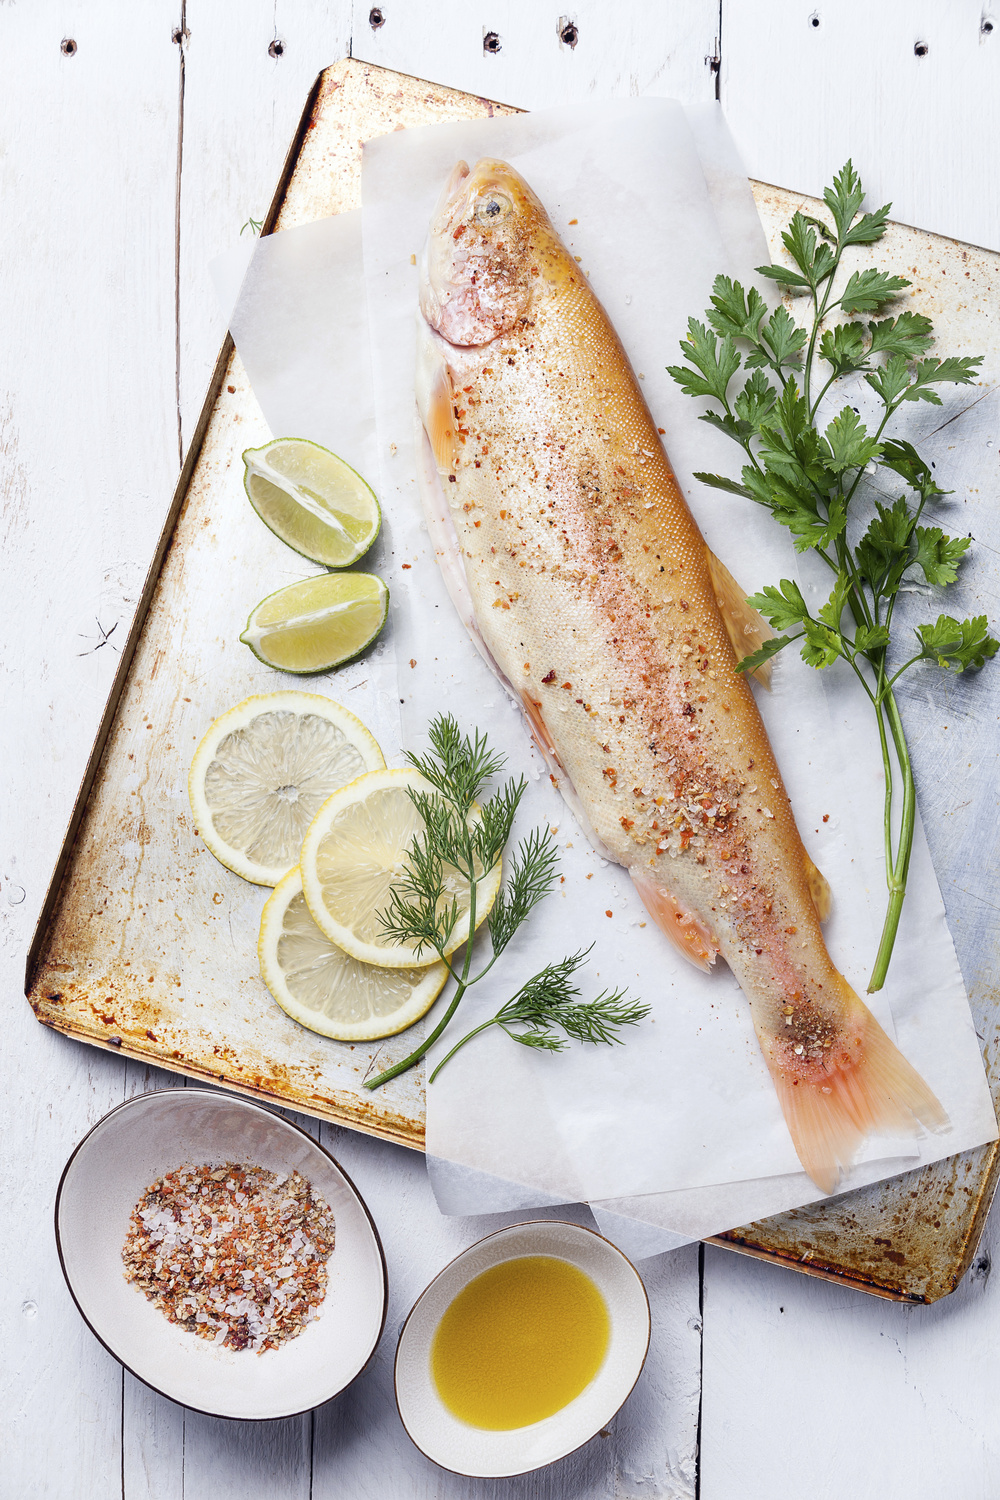 Raw fish golden trout with spices on wooden background